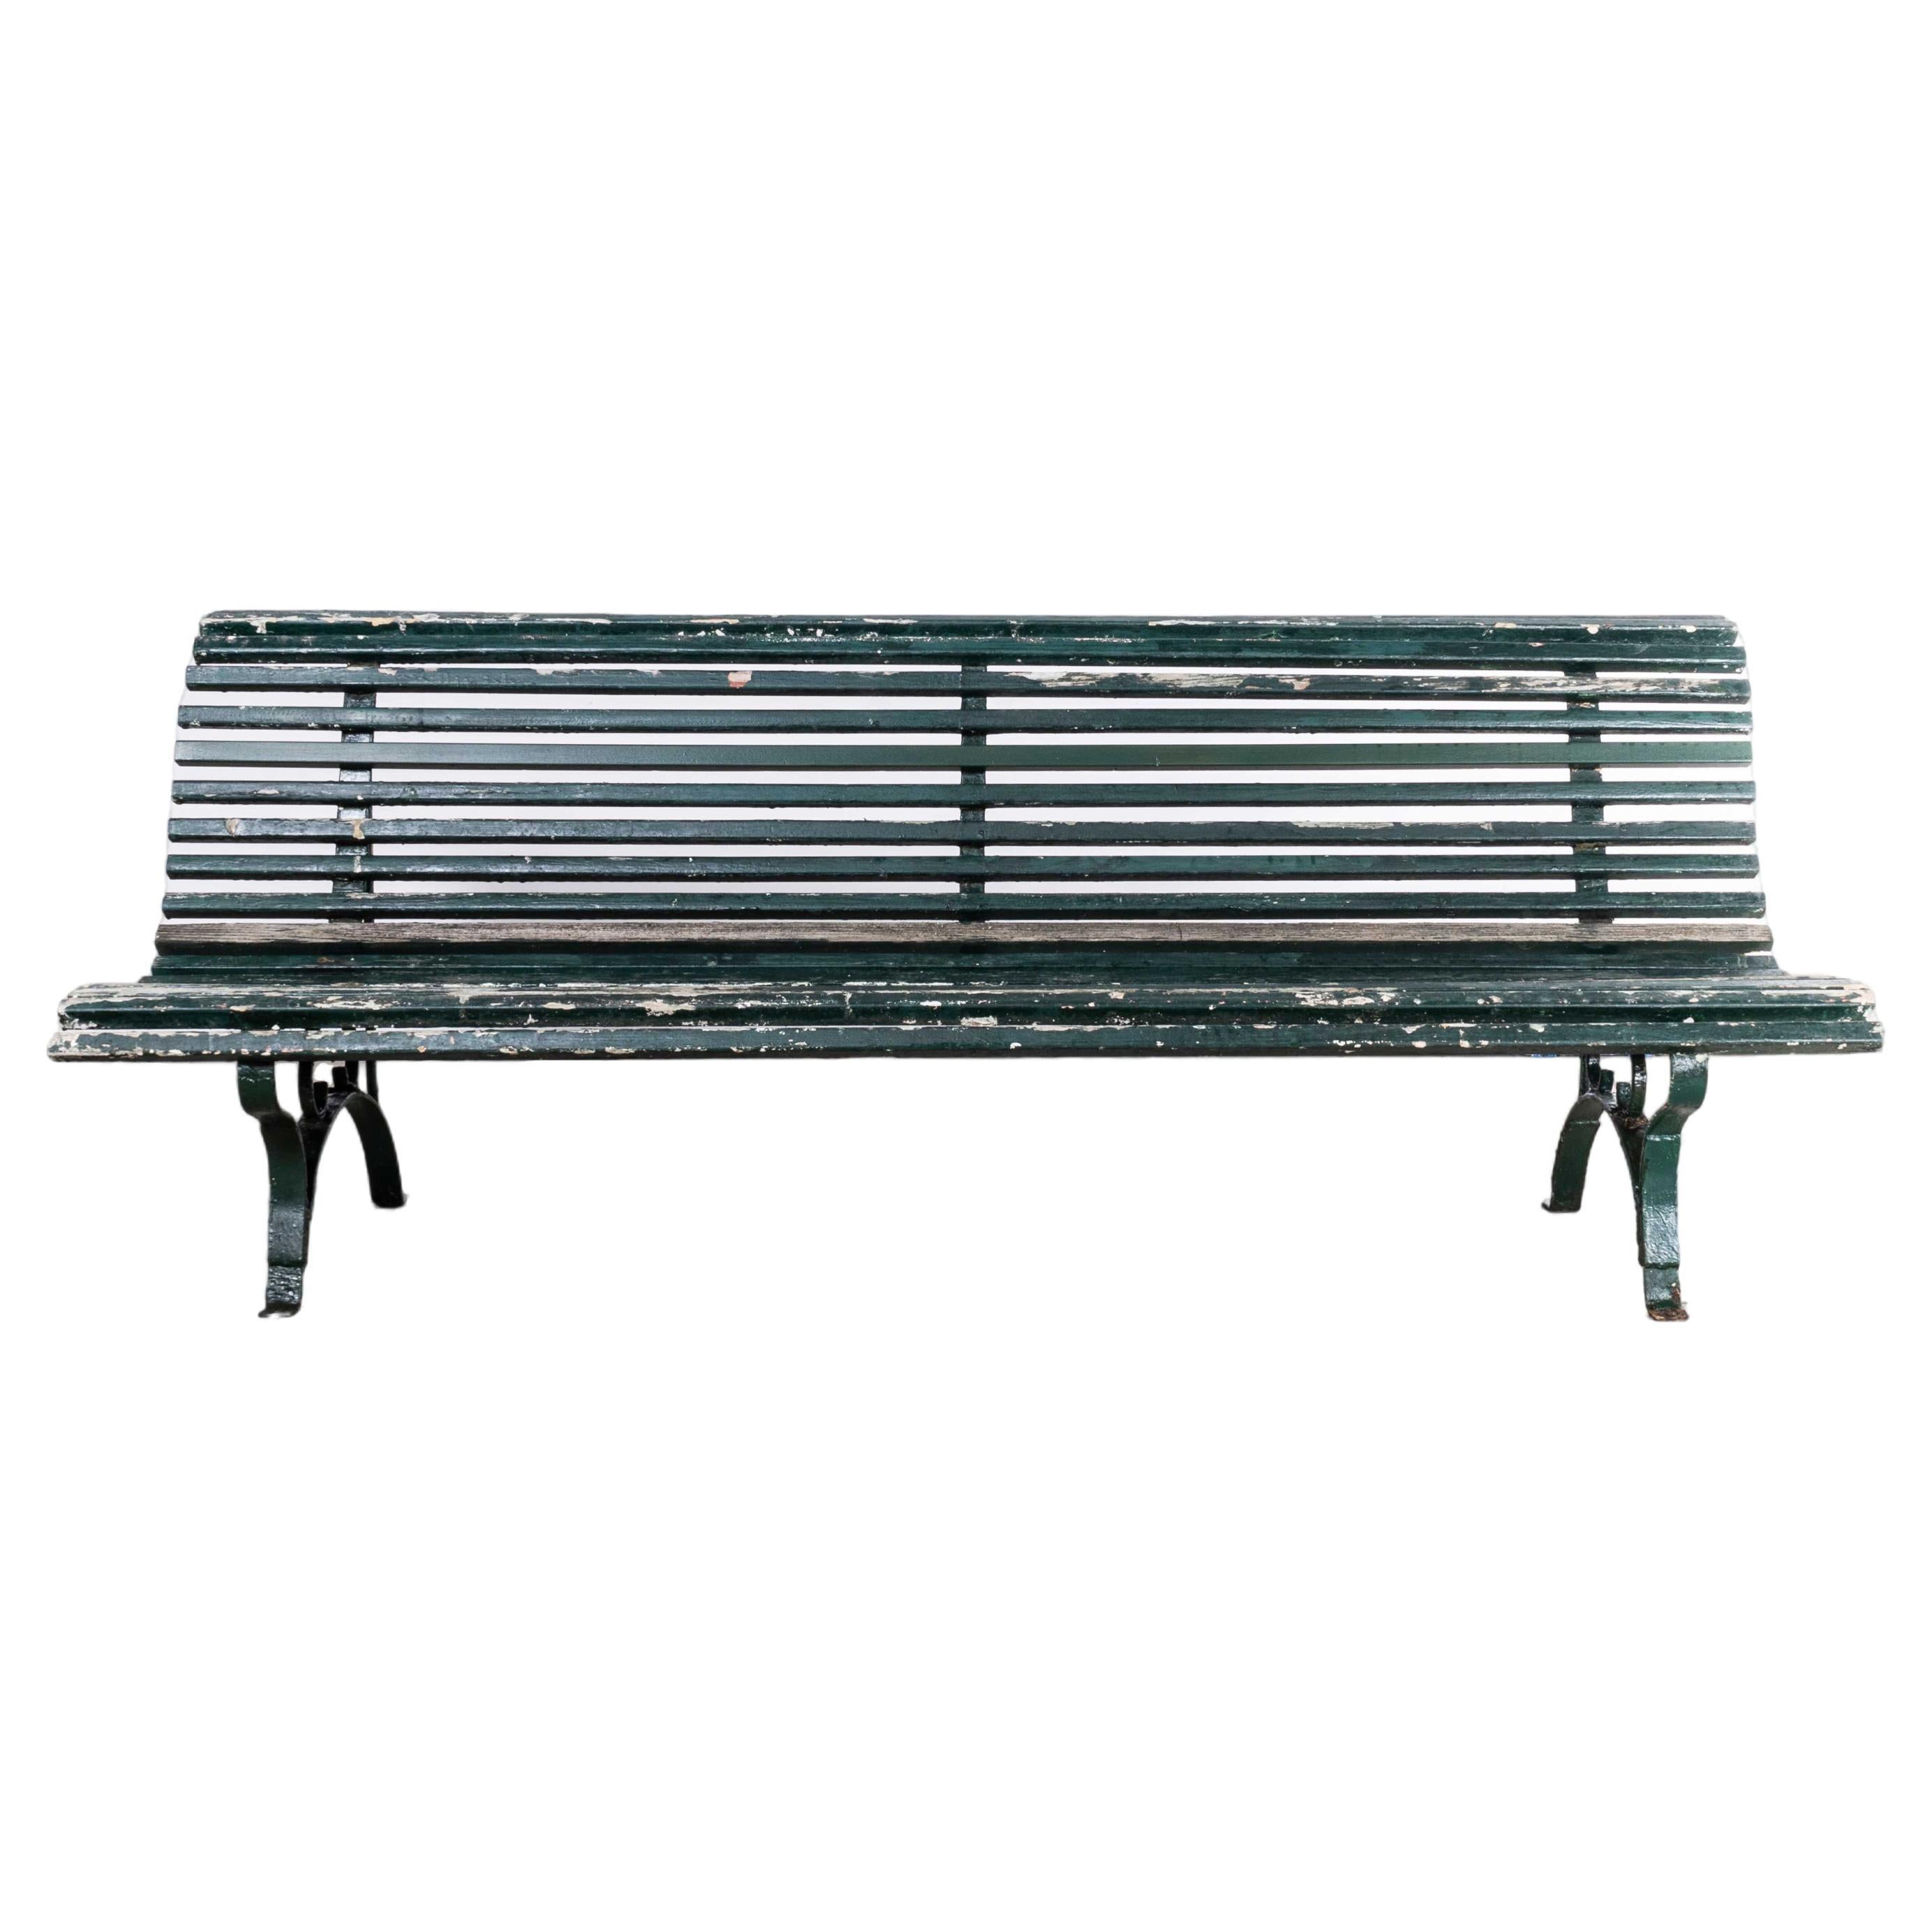 What is the best wood for an outside bench?